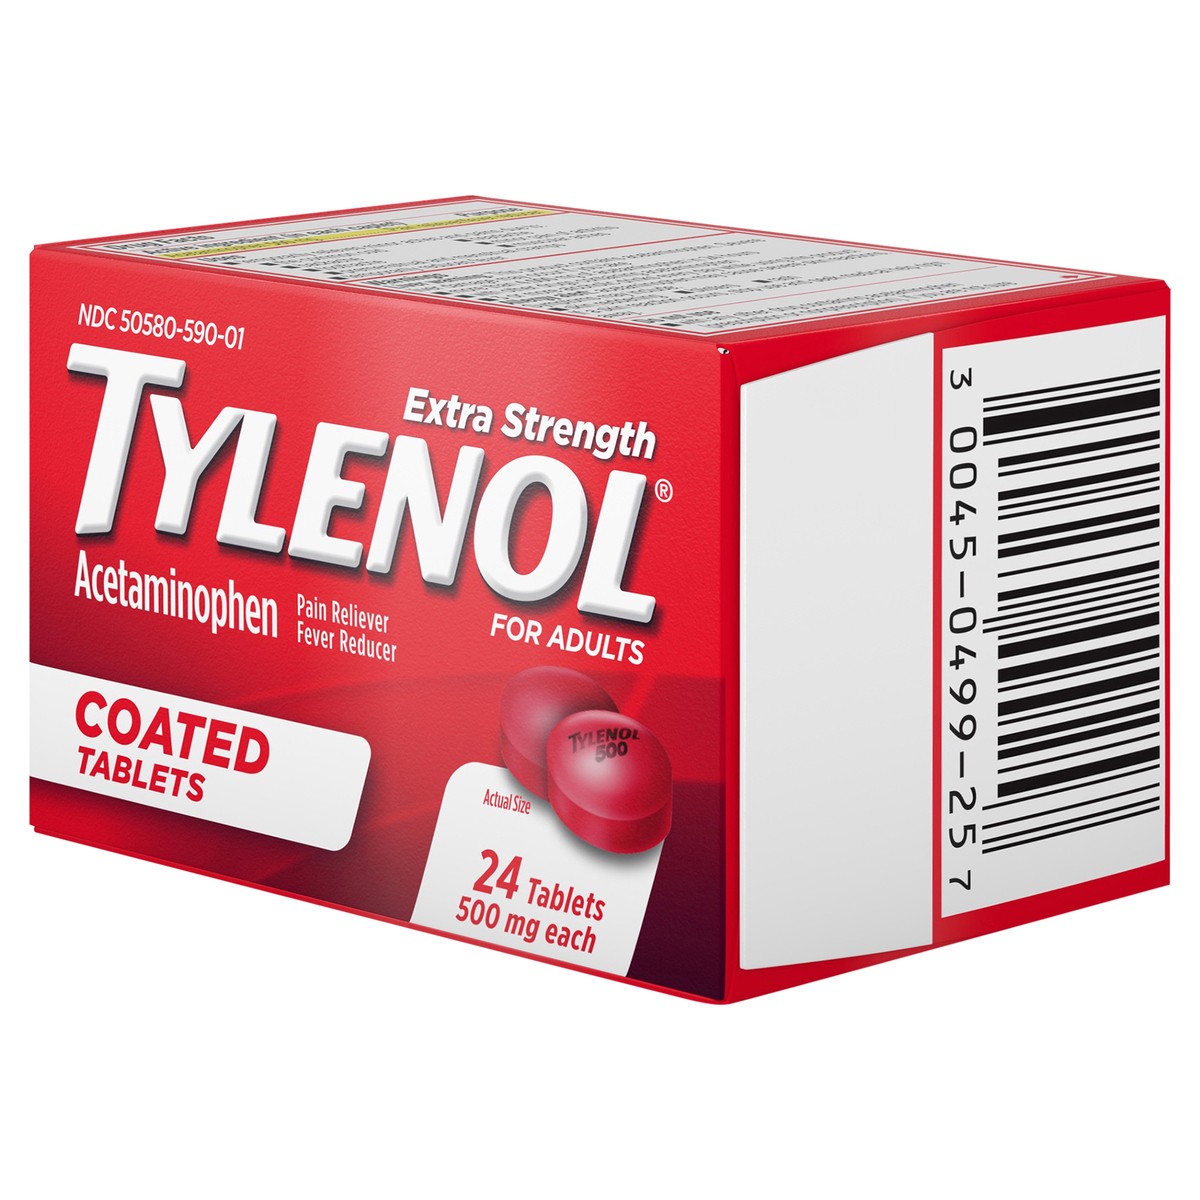 slide 2 of 7, Tylenol Extra Strength Pain Relief Coated Tablets for Adults, 500mg Acetaminophen Pain Reliever and Fever Reducer per Tablet for Minor Aches, Pains, and Headaches, 24 ct, 24 ct